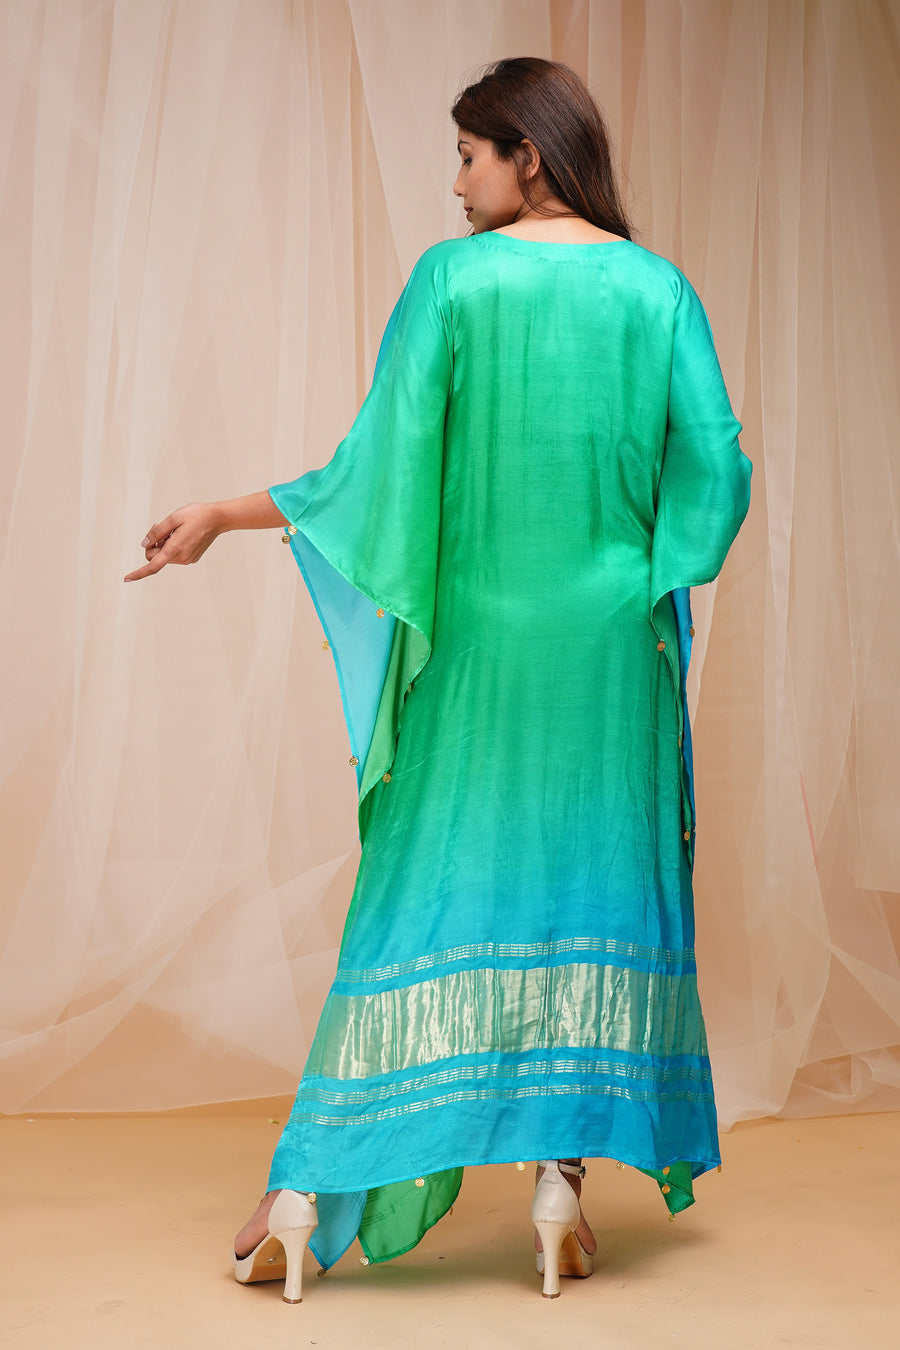 4D Dyeing of Coral Blue and Bright Green Model Satin Silk Kaftaan